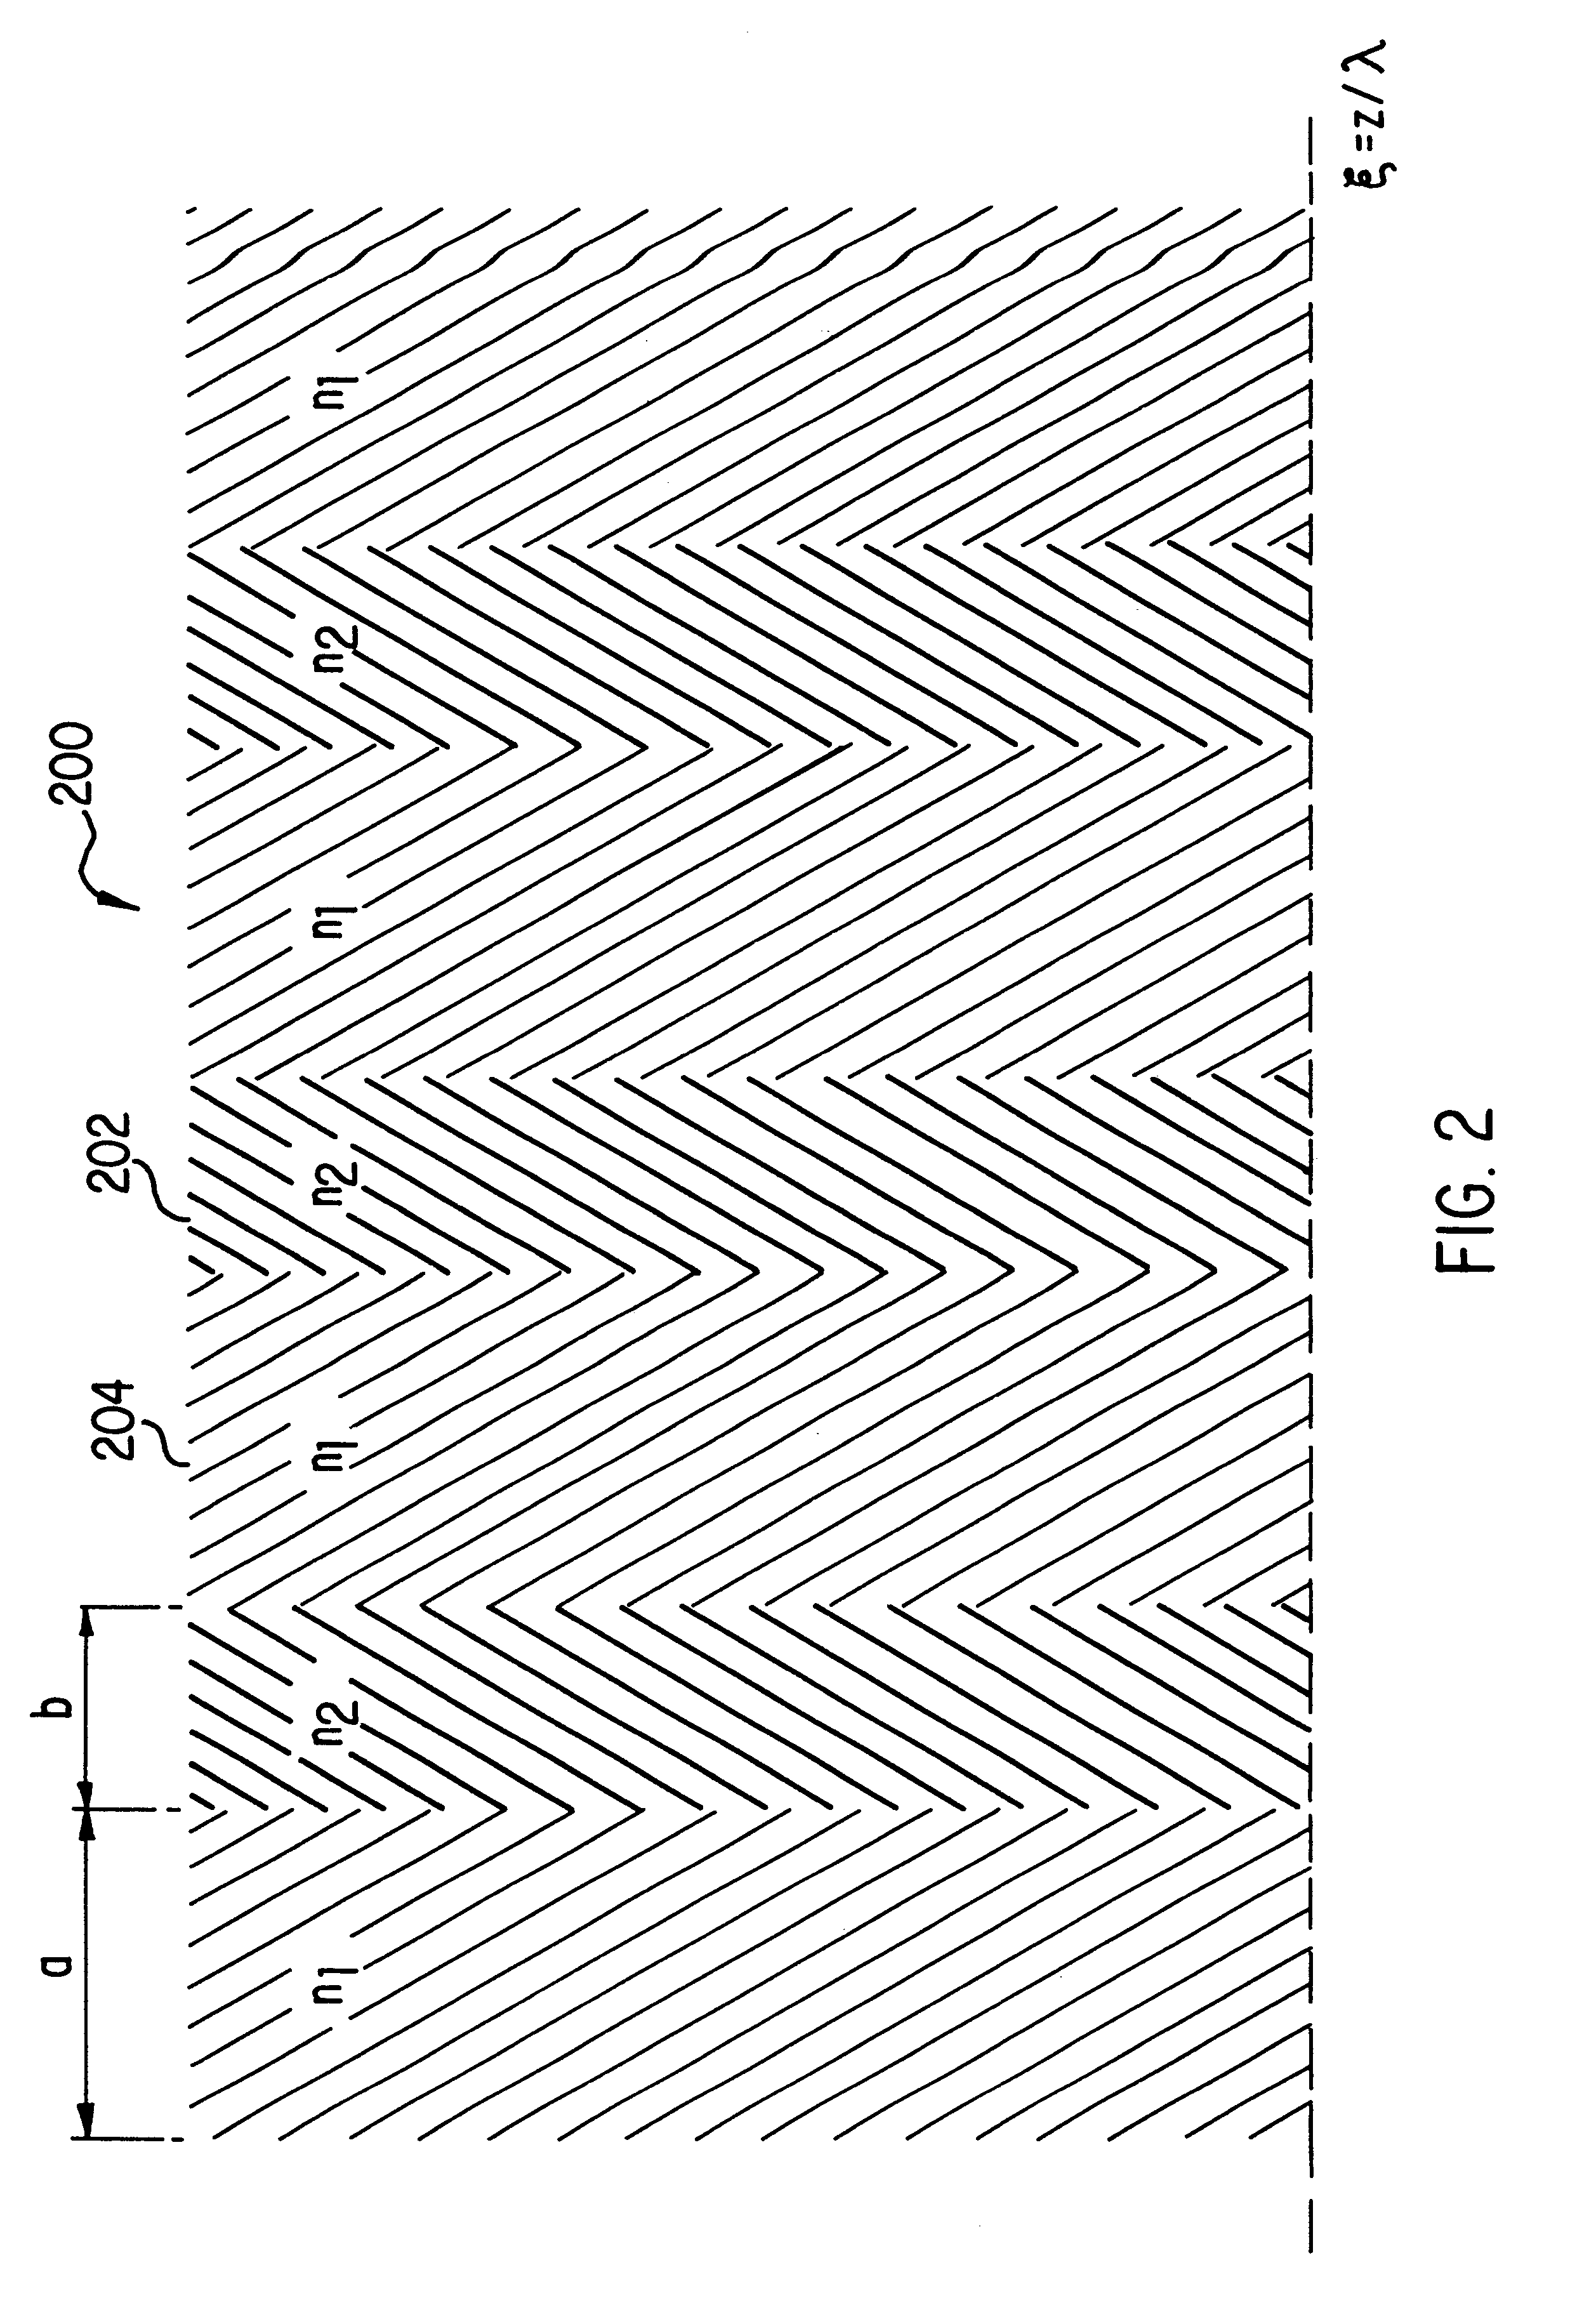 Photonic signal frequency conversion using a photonic band gap structure